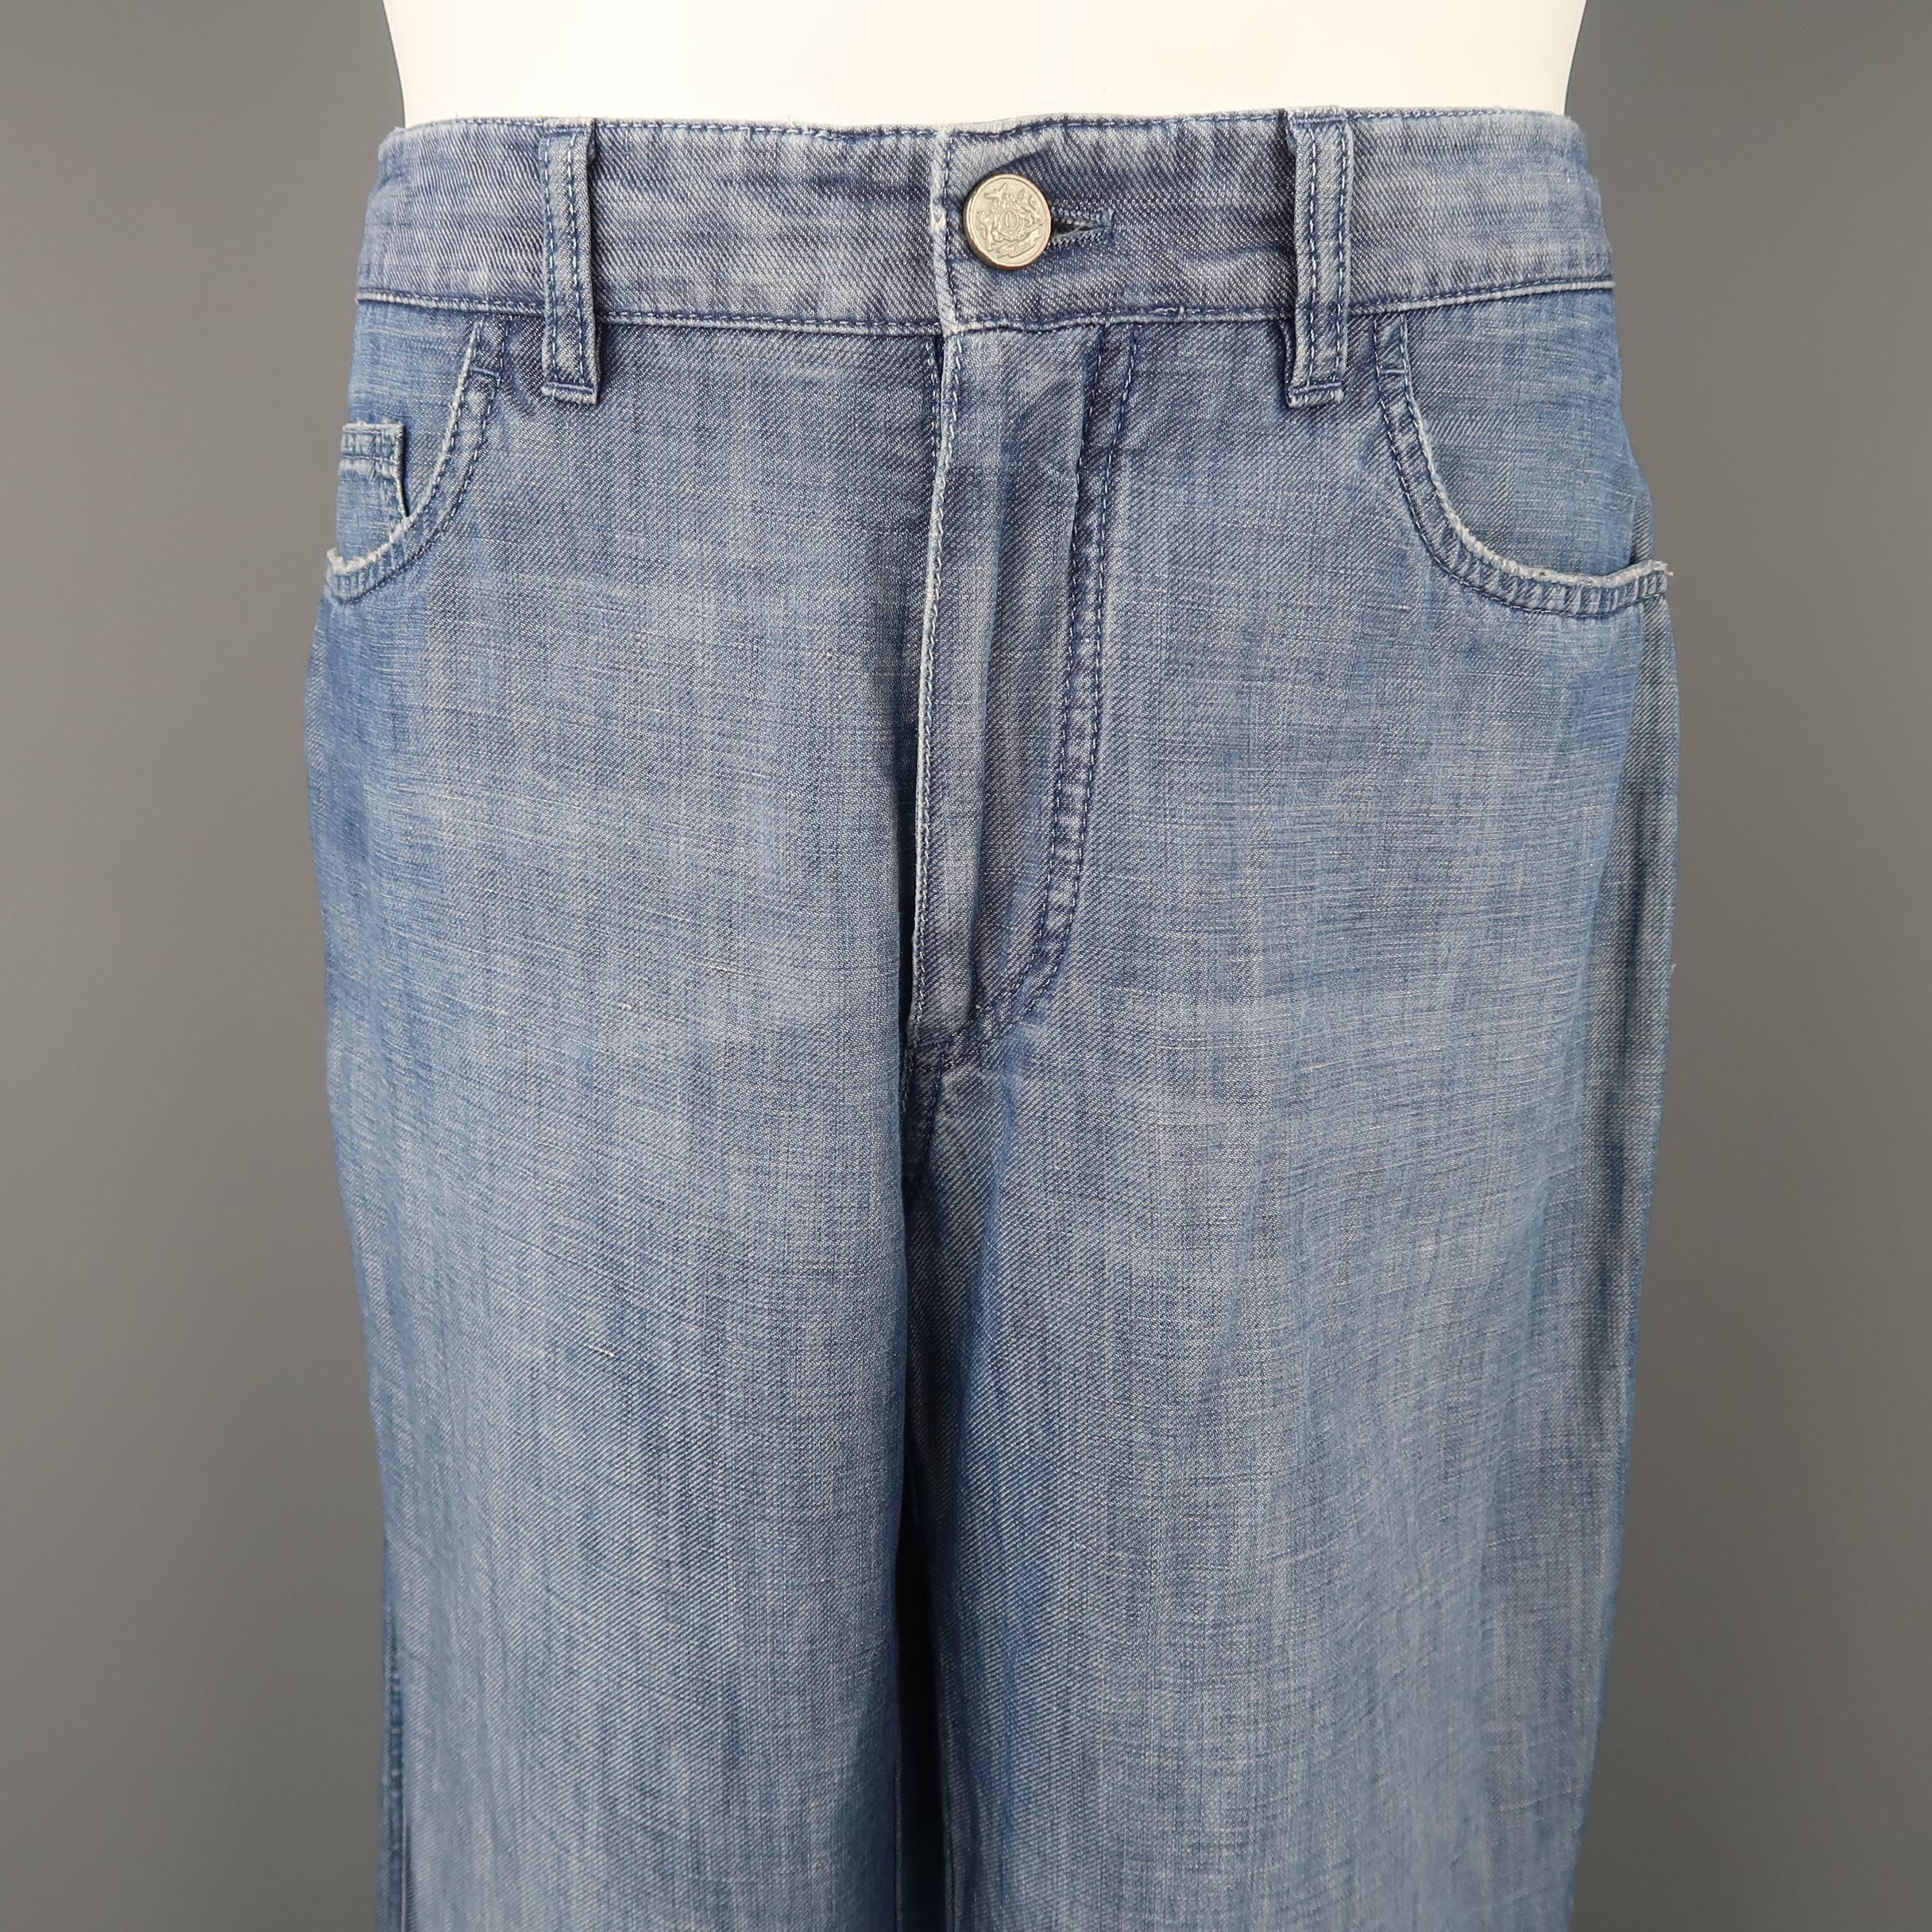 BRIONI straight leg  jeans come in a medium blue linen like light weight denim with a classic five pocket zip fly style. Made in Italy.
 
Good Pre-Owned Condition.
Marked: 32 R
 
Measurements:
 
Waist: 32 in.
Rise: 9.5 in.
Inseam:  30 in.
